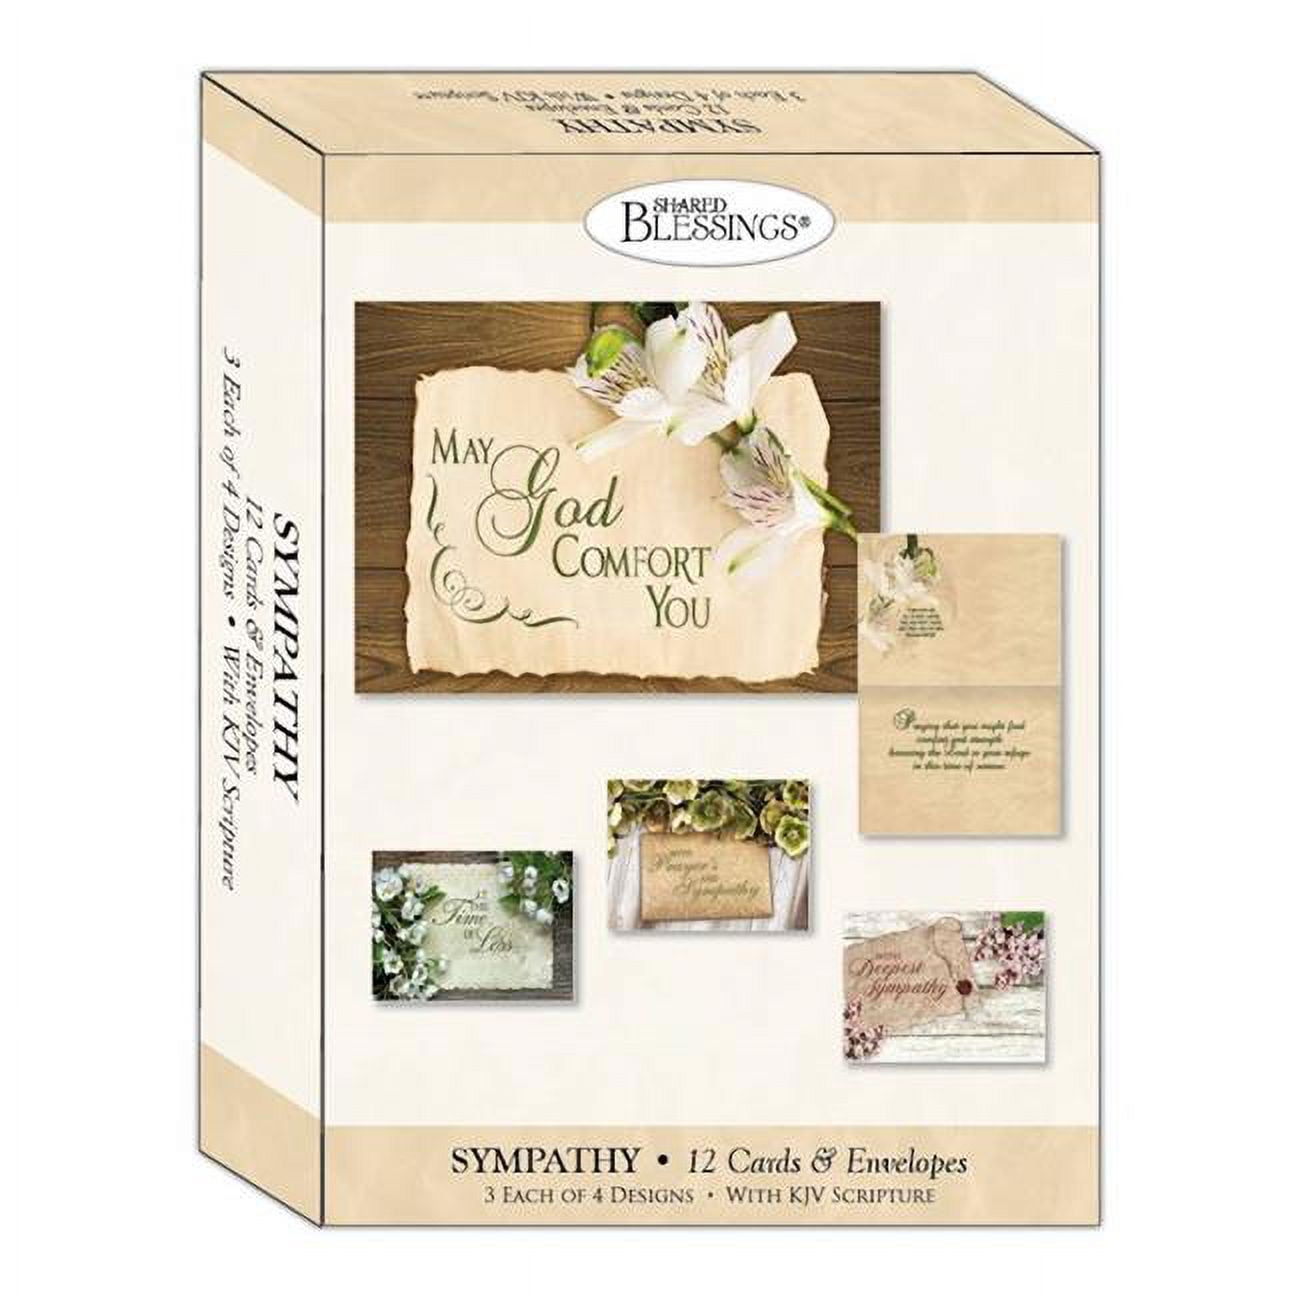 Picture of Crown Point Graphics 309289 Vintage Floral Sympathy Shared Blessings Boxed Card - Box of 12